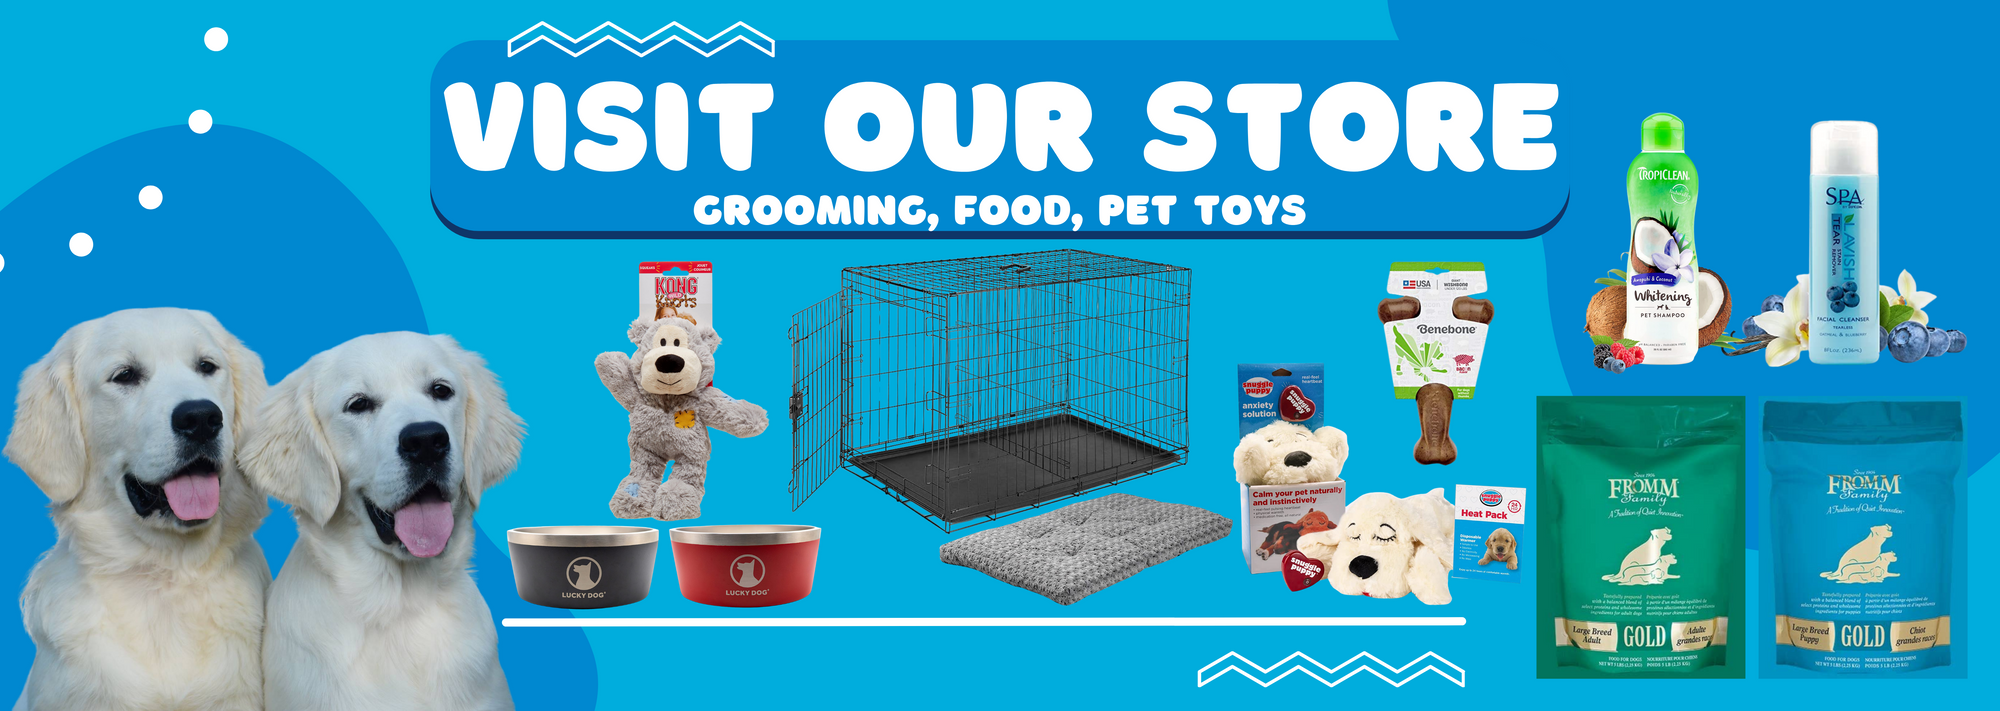 VISIT OUR STORE GROOMING, FOOD, PET TOYS